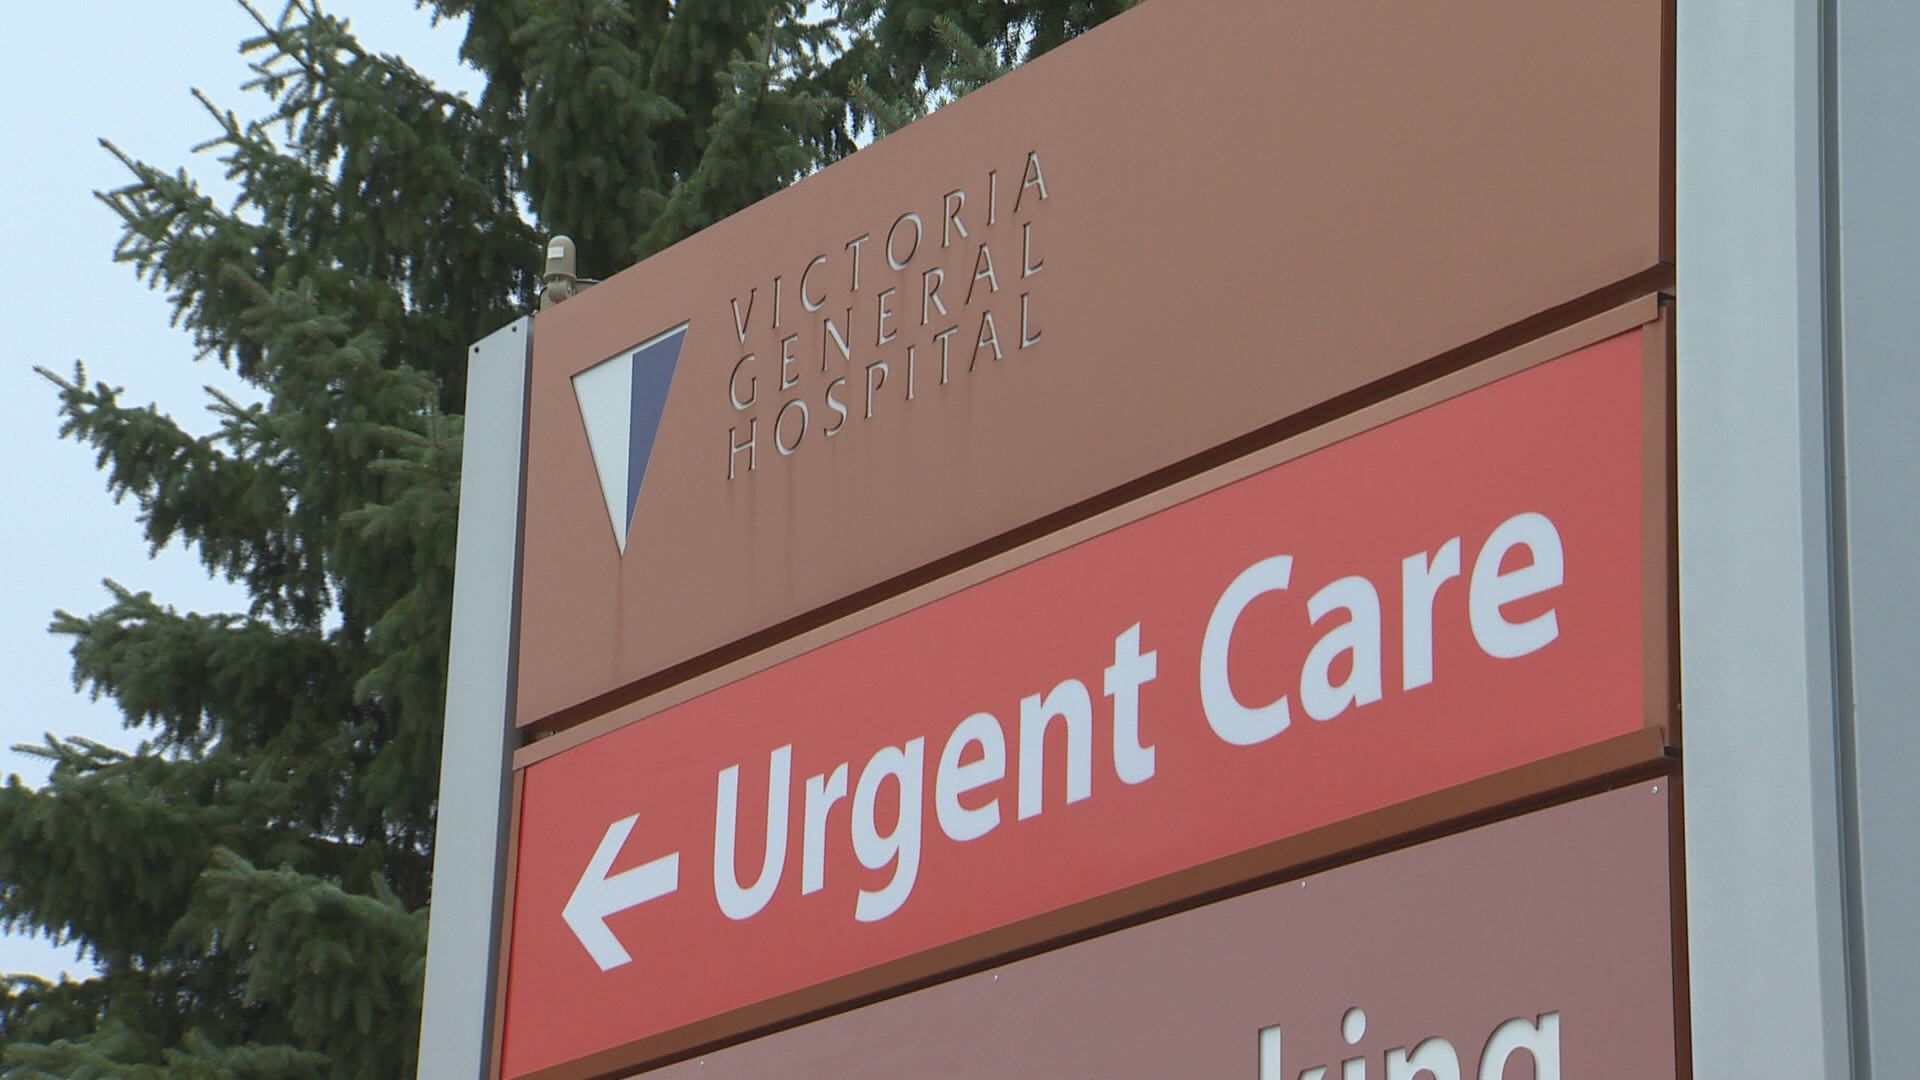 Treatment facility, restored ER among changes announced for Winnipeg’s Victoria Hospital